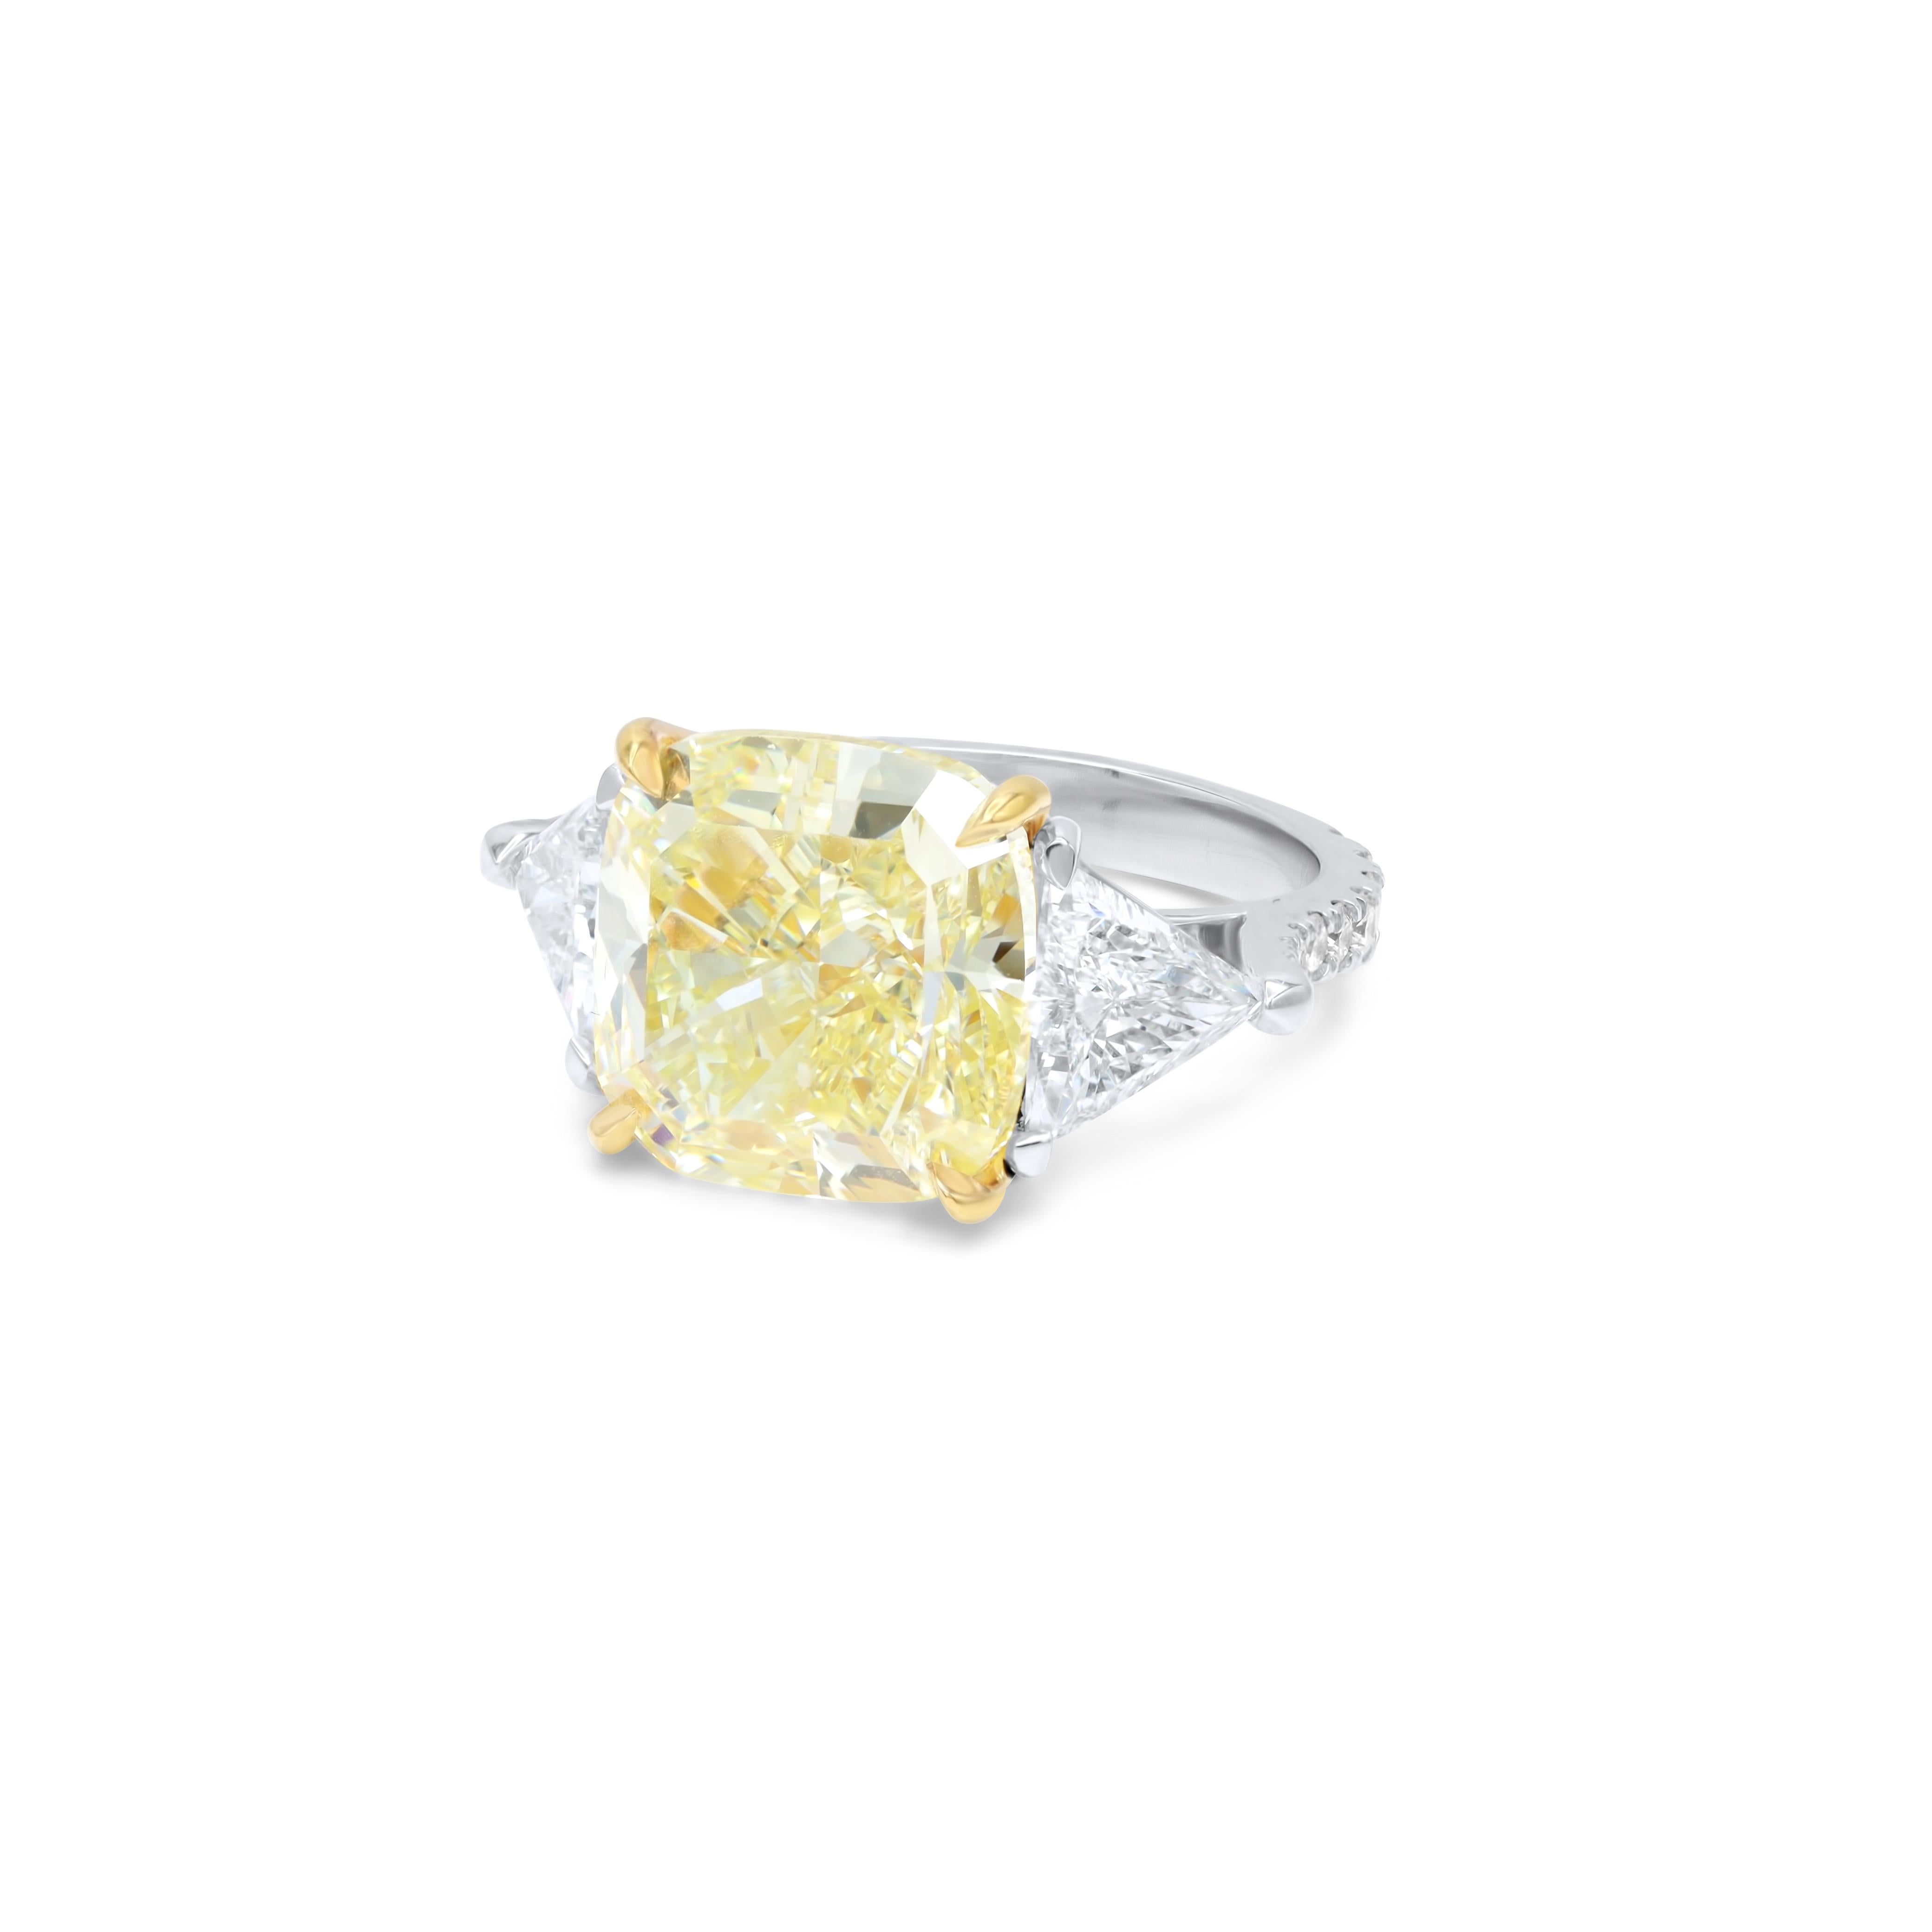 Platinum and 18 kt yellow gold engagement ring featuring a center (FLY VS1) 10.01 ct cushion cut yellow diamond(GIA# 2225261697) with 2.10 cts tw of diamonds on the sides (1.49 cts of trapezoids)
Diana M is one-stop shop for all your jewelry